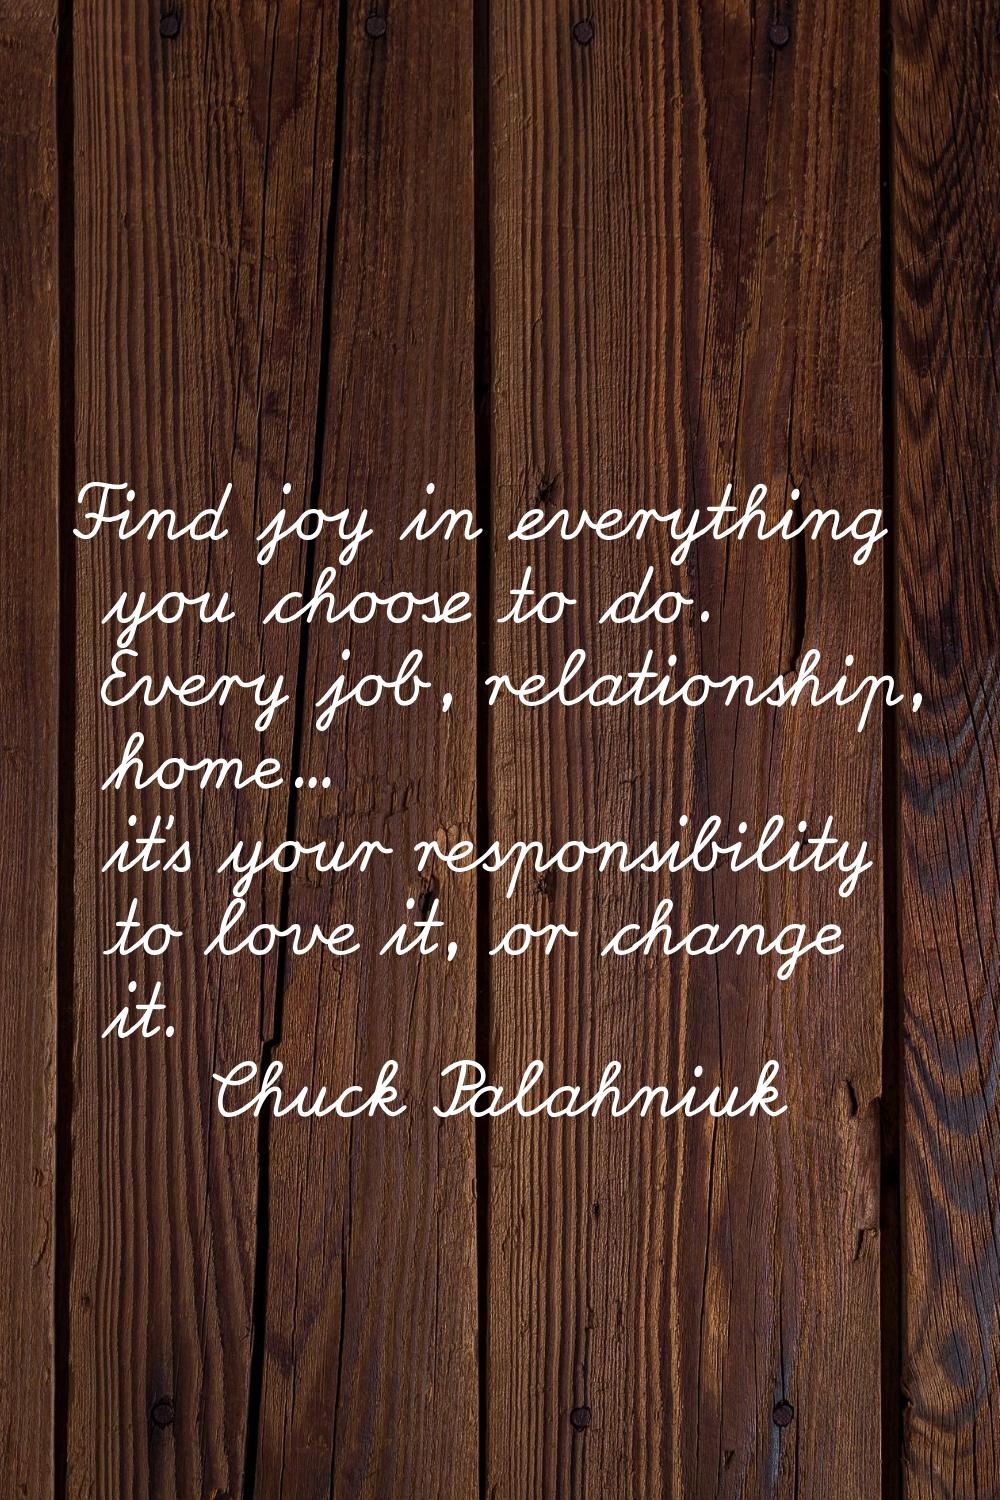 Find joy in everything you choose to do. Every job, relationship, home... it's your responsibility 